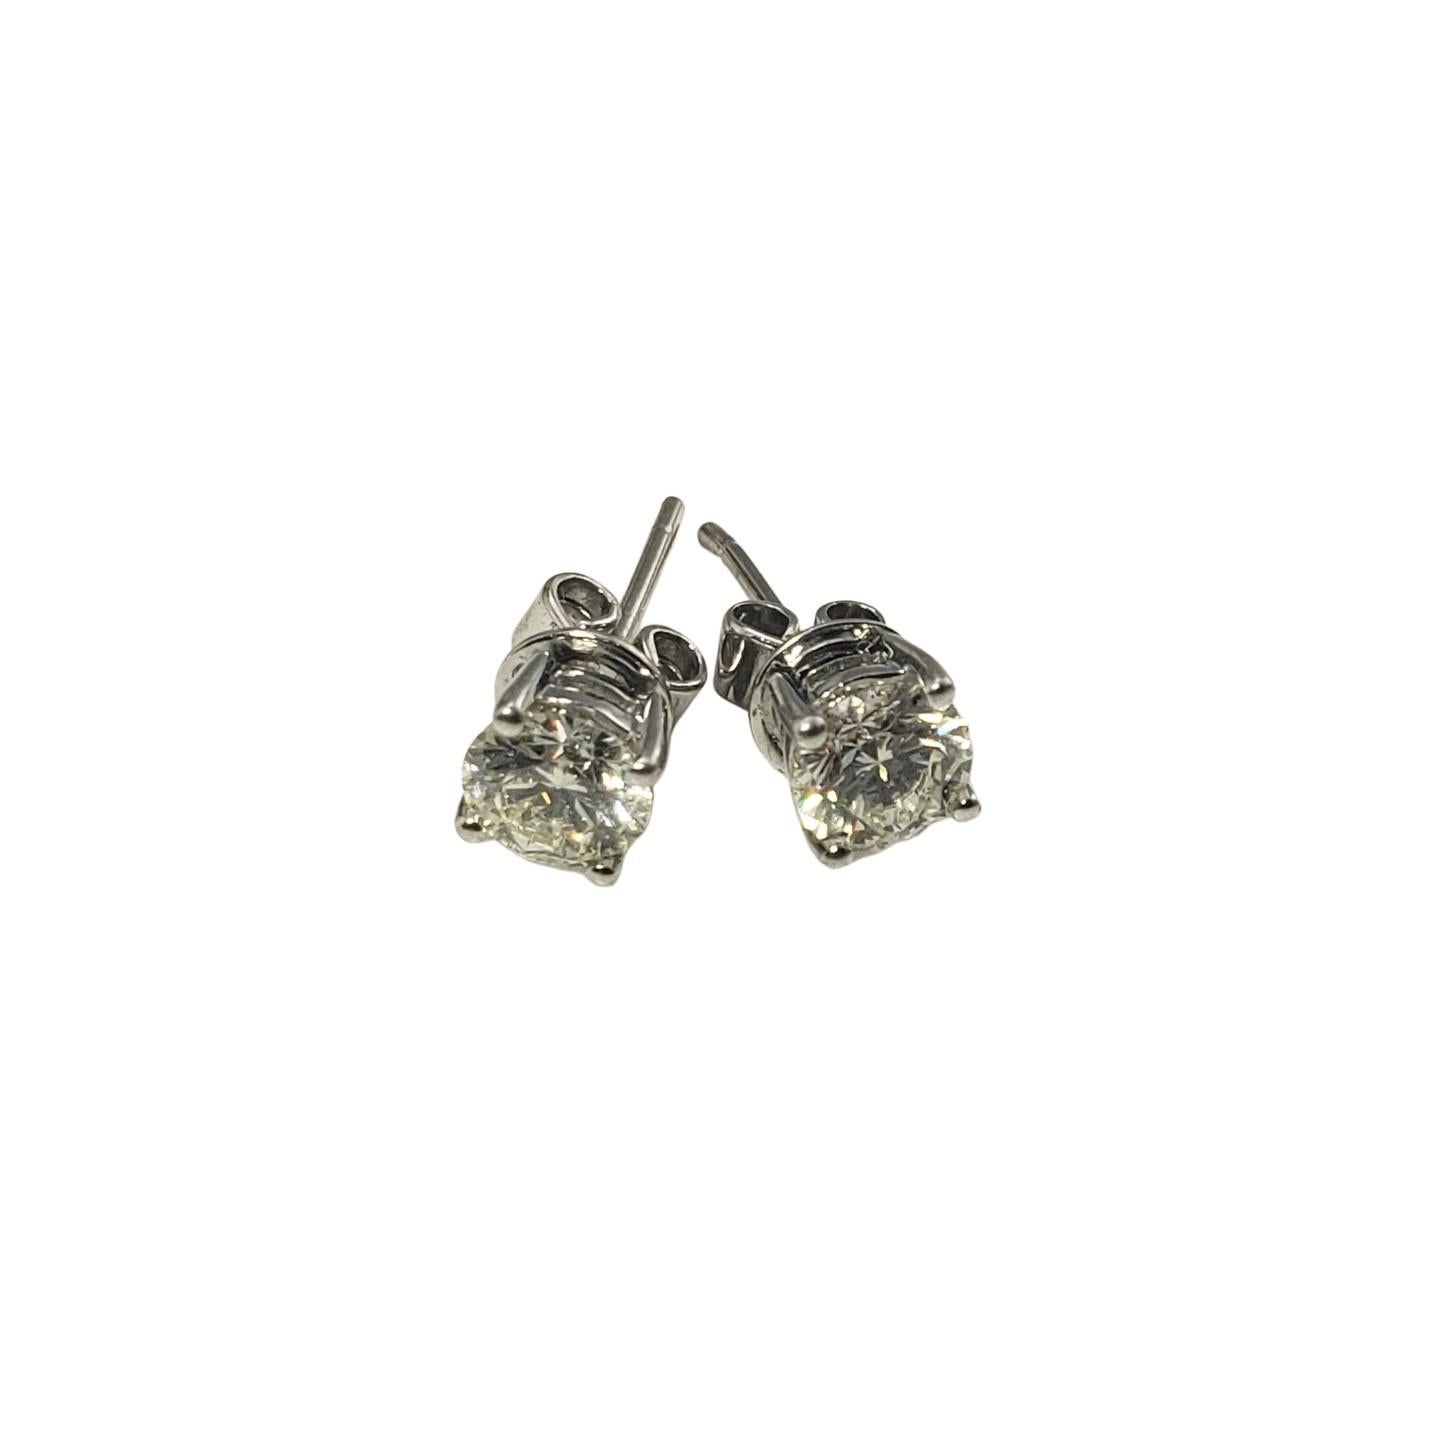 Vintage 18 Karat White Gold Diamond Stud Earrings .96 TCW.-

These sparkling stud earrings each features one round brilliant cut diamond set in classic 18K white gold. Push back closures.

Approximate total diamond weight: .96 ct. (.48cts